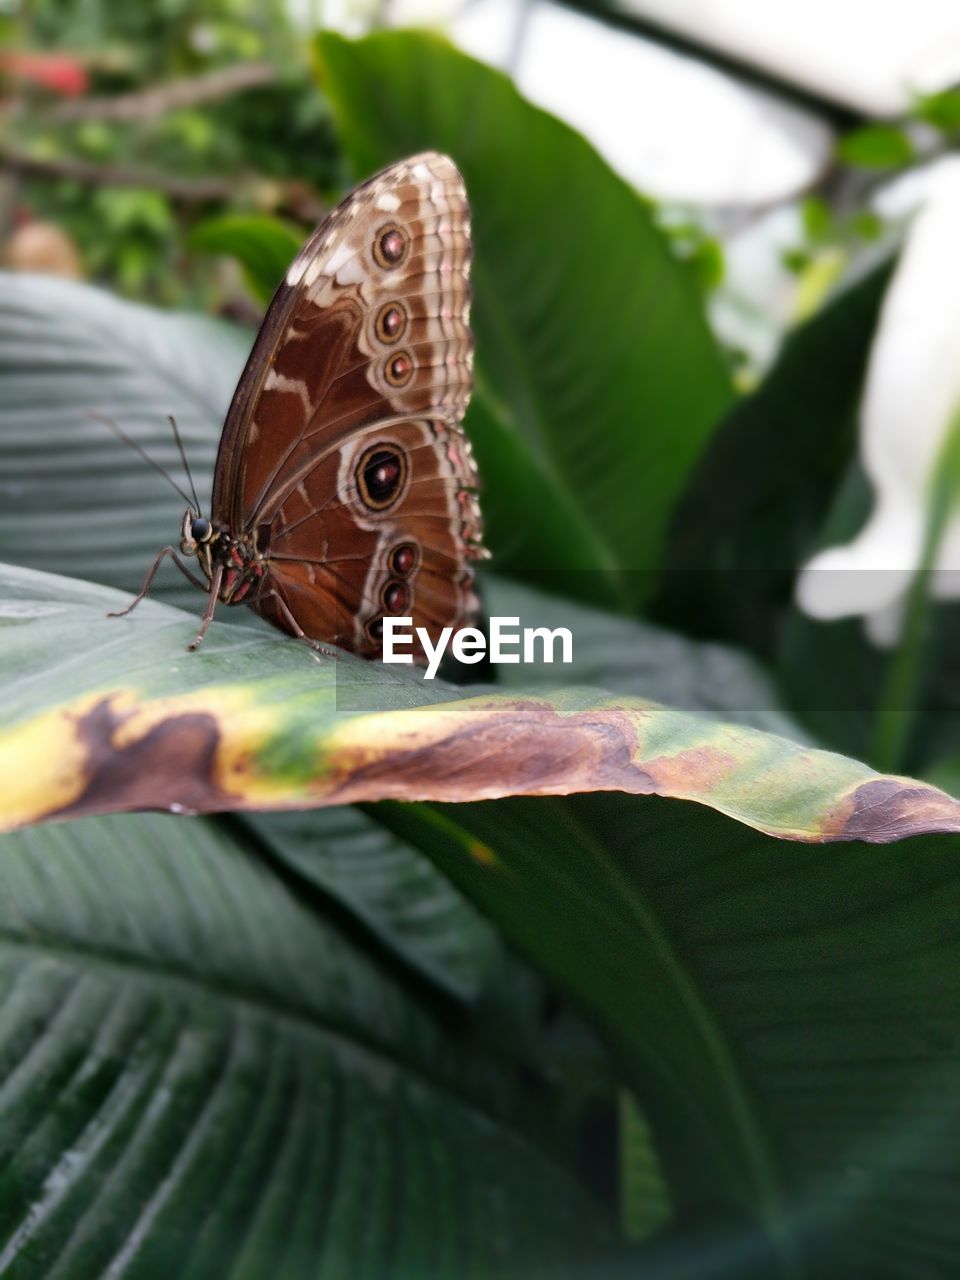 CLOSE-UP OF BUTTERFLY PERCHING ON LEAF OUTDOORS